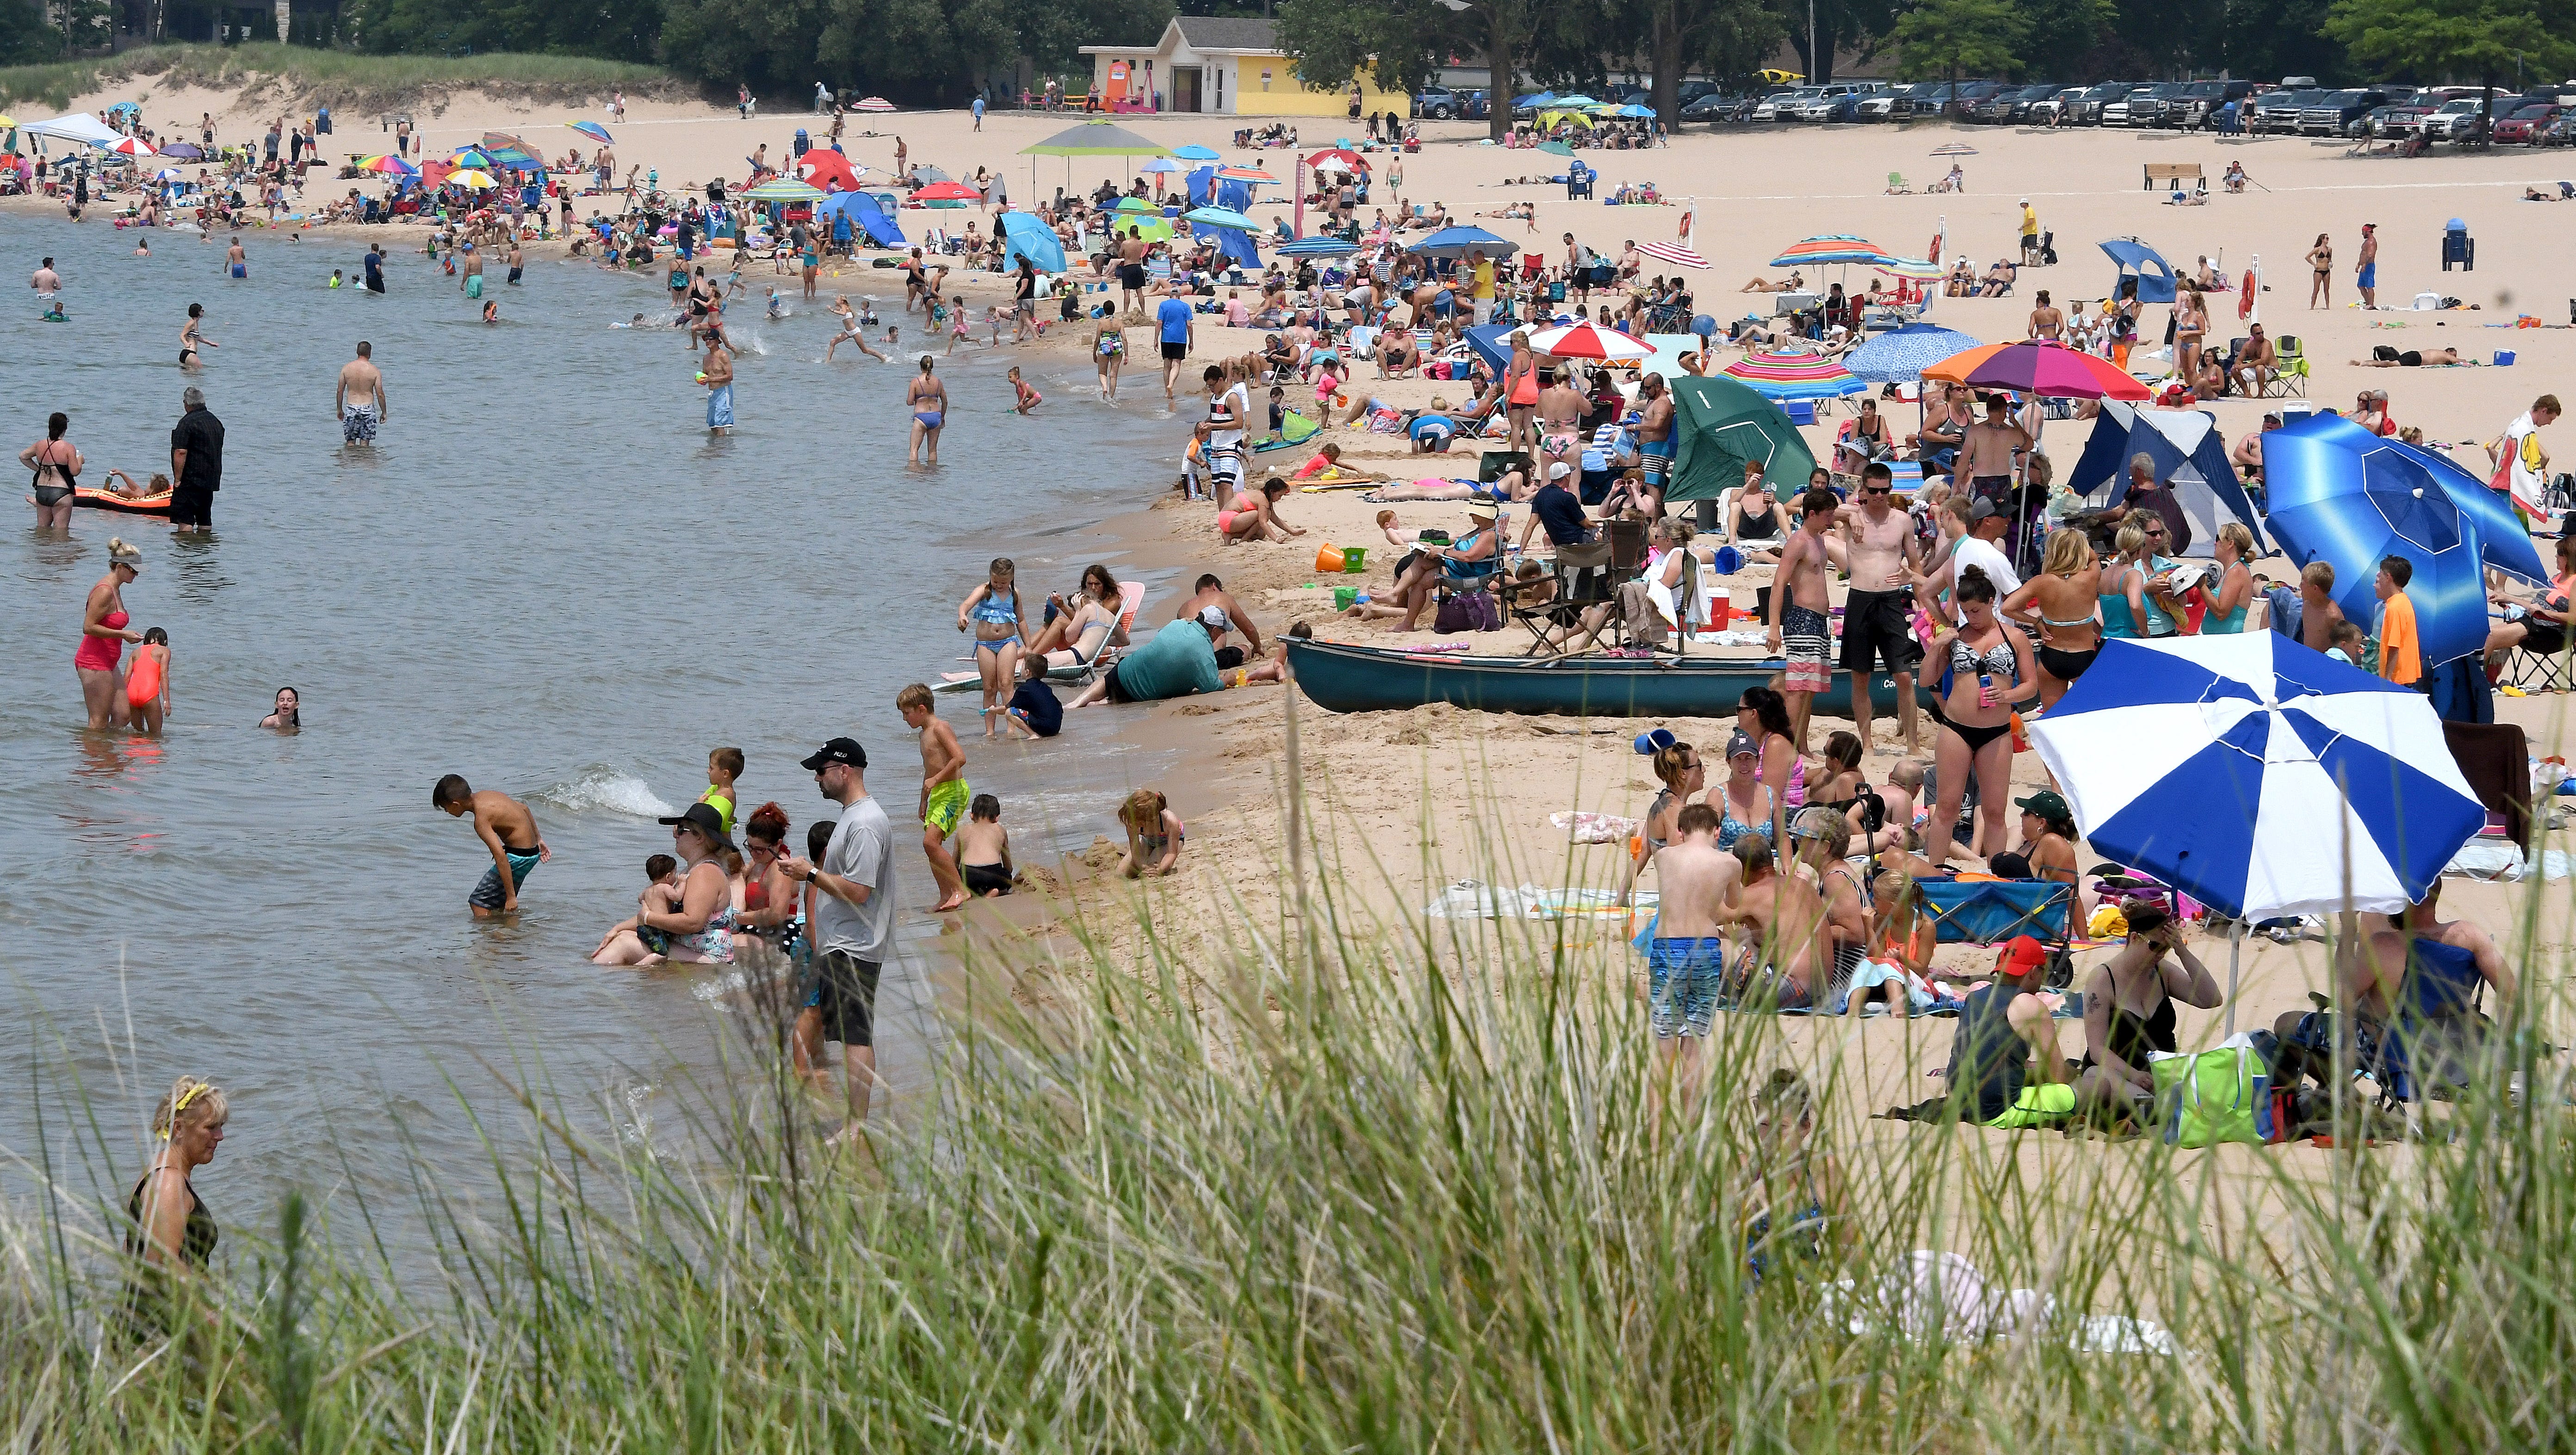 Swimmers and sunbathers at enjoy at day at the beach on Lake Michigan at Ludington on Thursday, July 5, 2018.